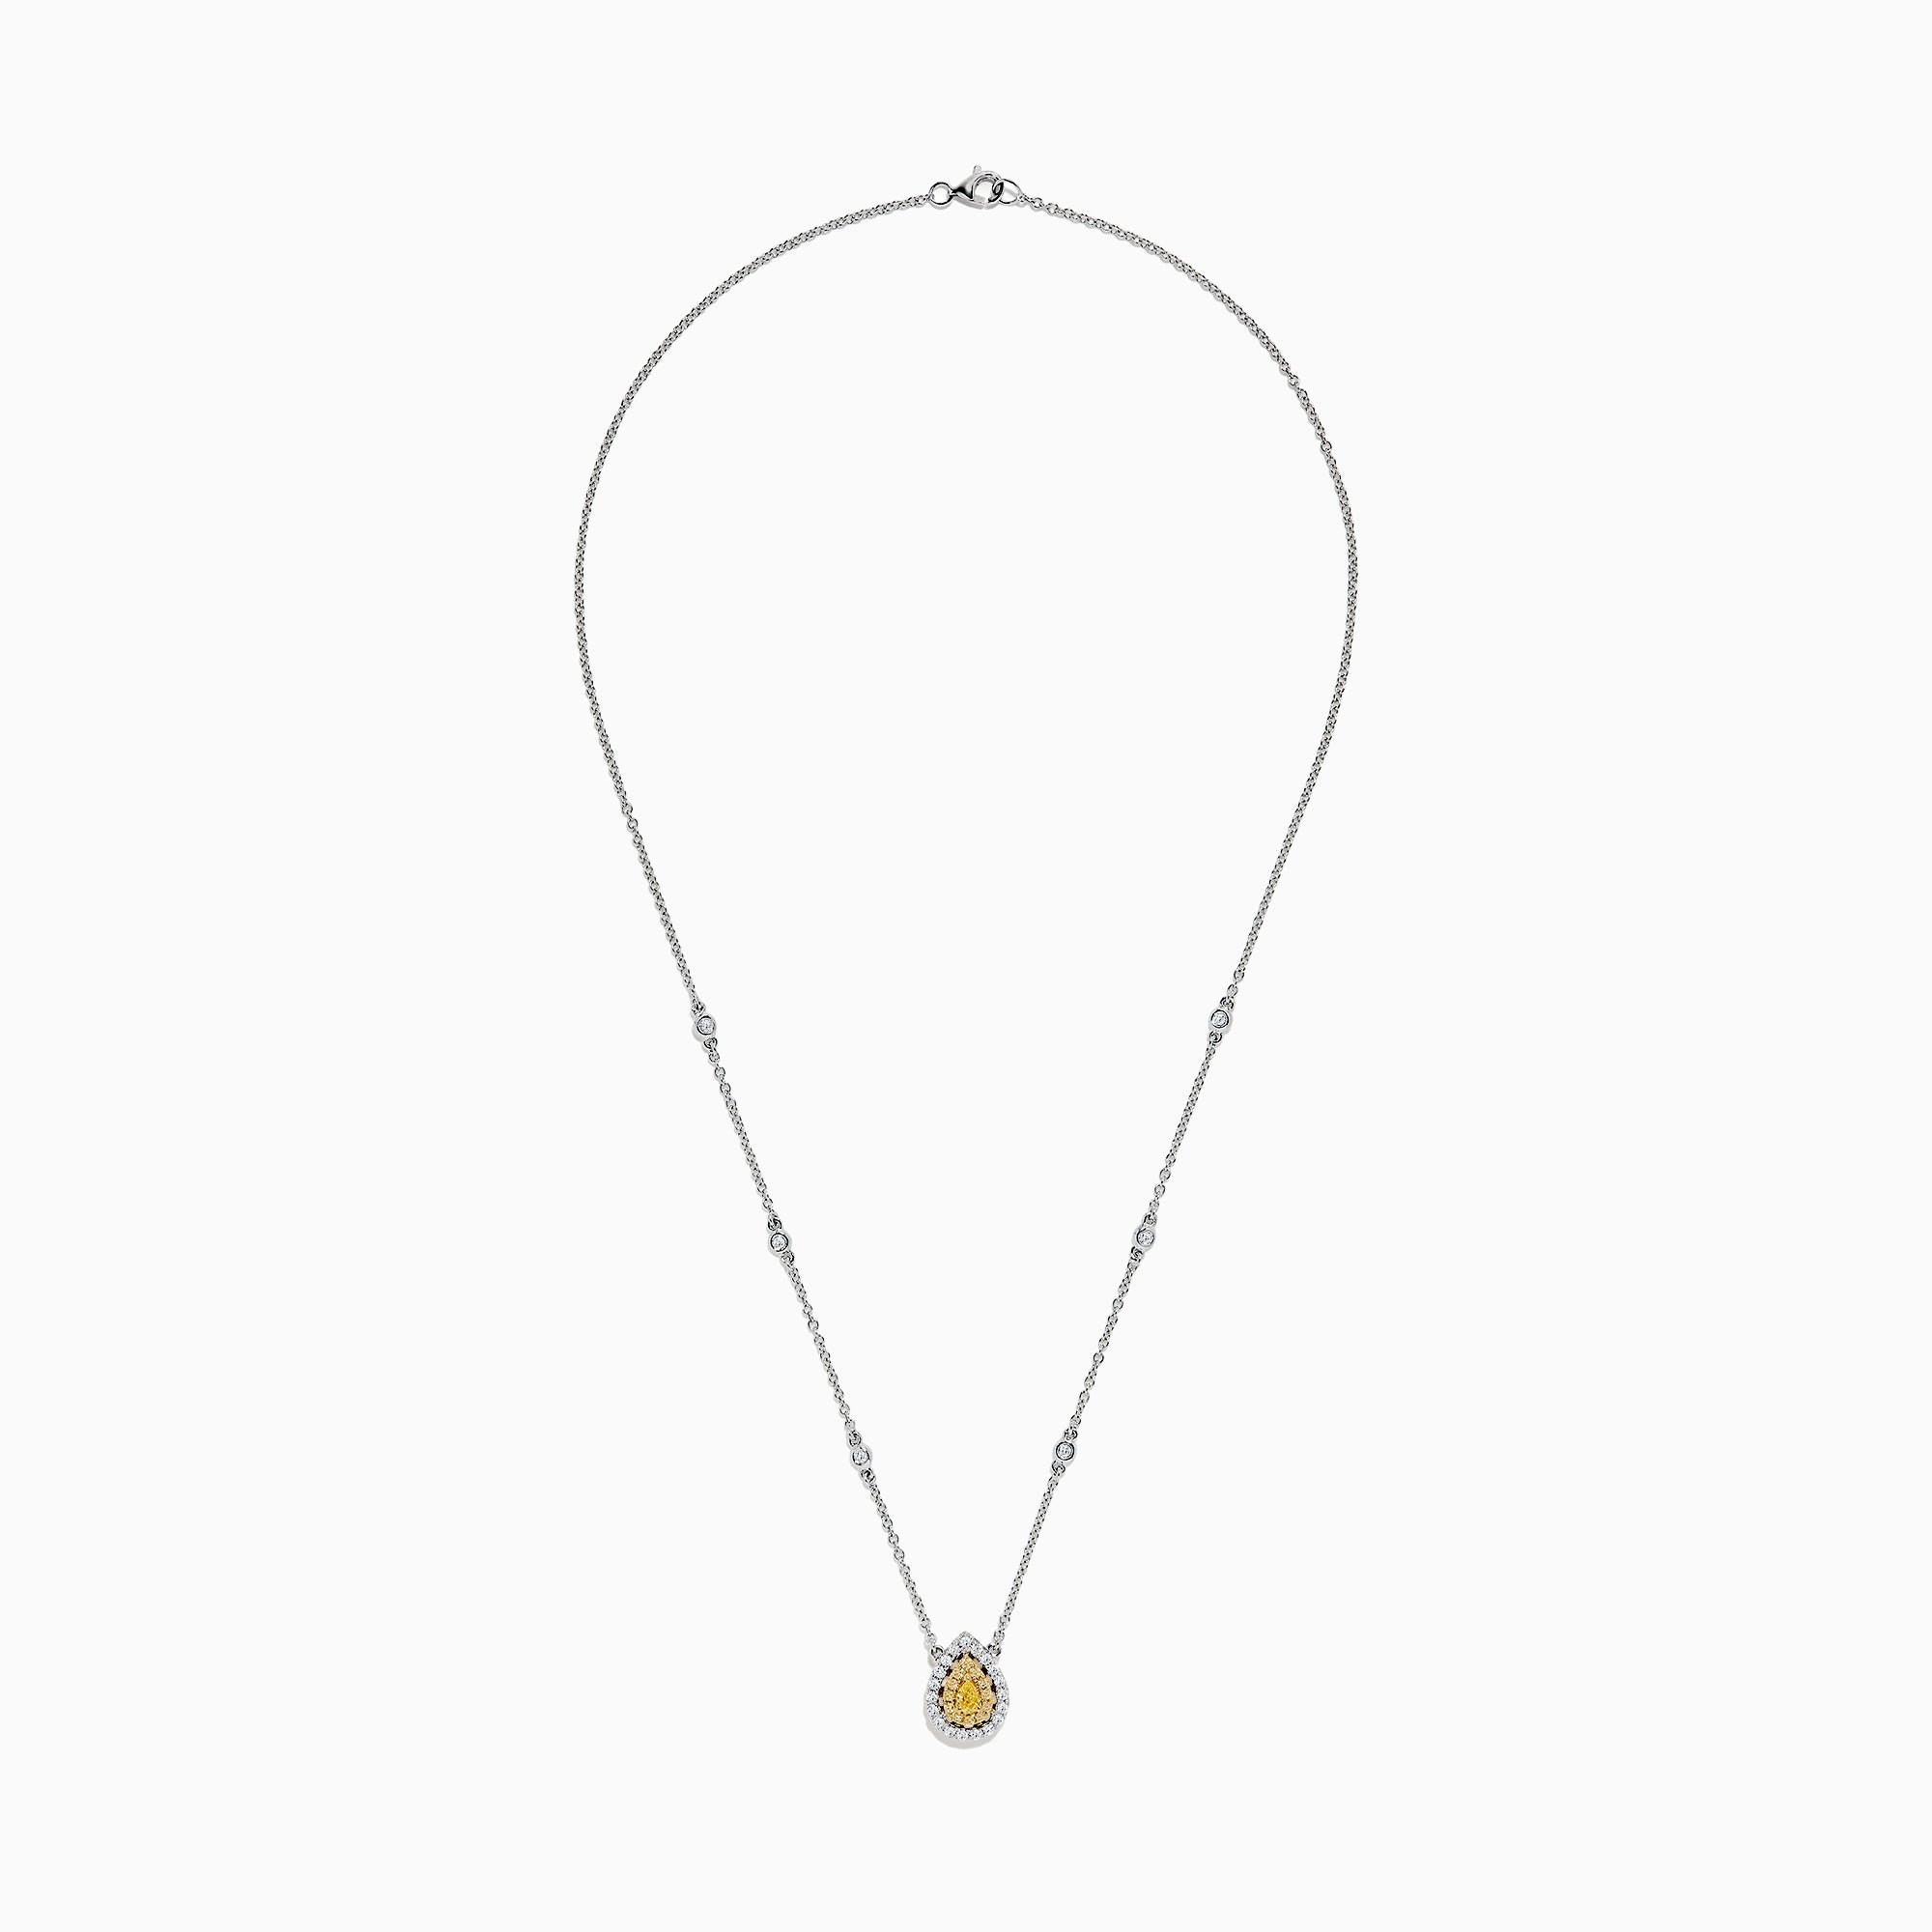 Effy Canare 18K Two-Tone Gold Yellow and White Diamond Necklace, 0.69 TCW